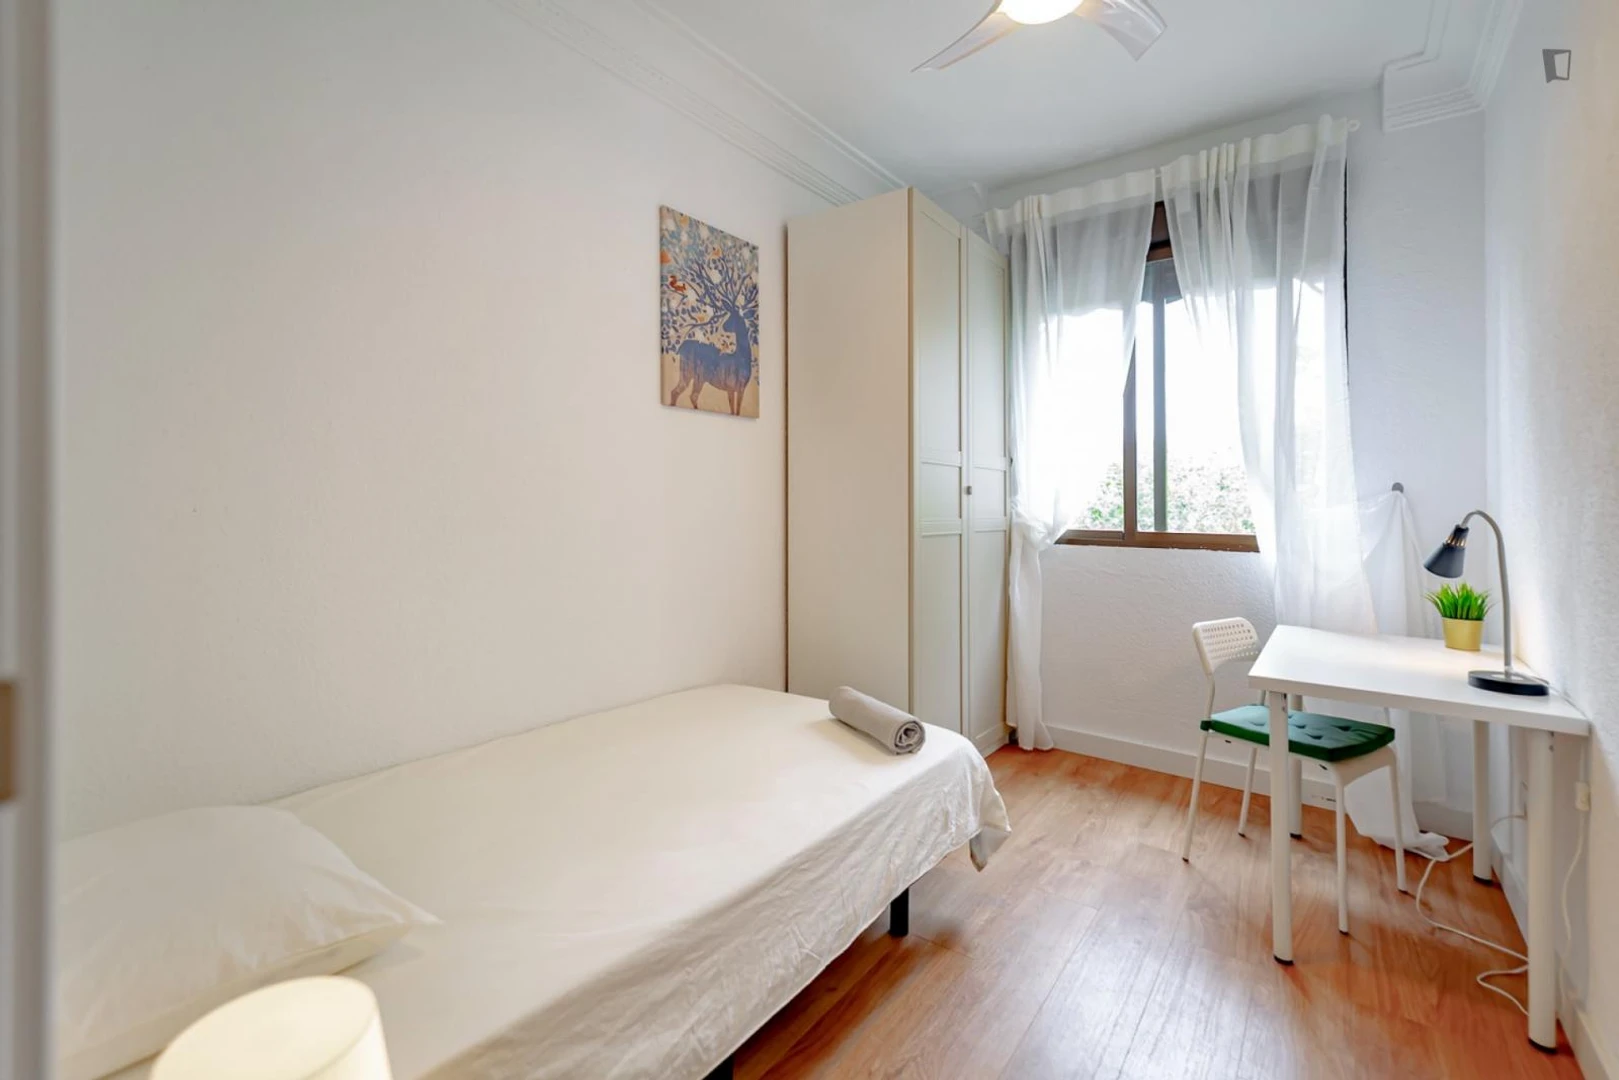 Room for rent in a shared flat in madrid